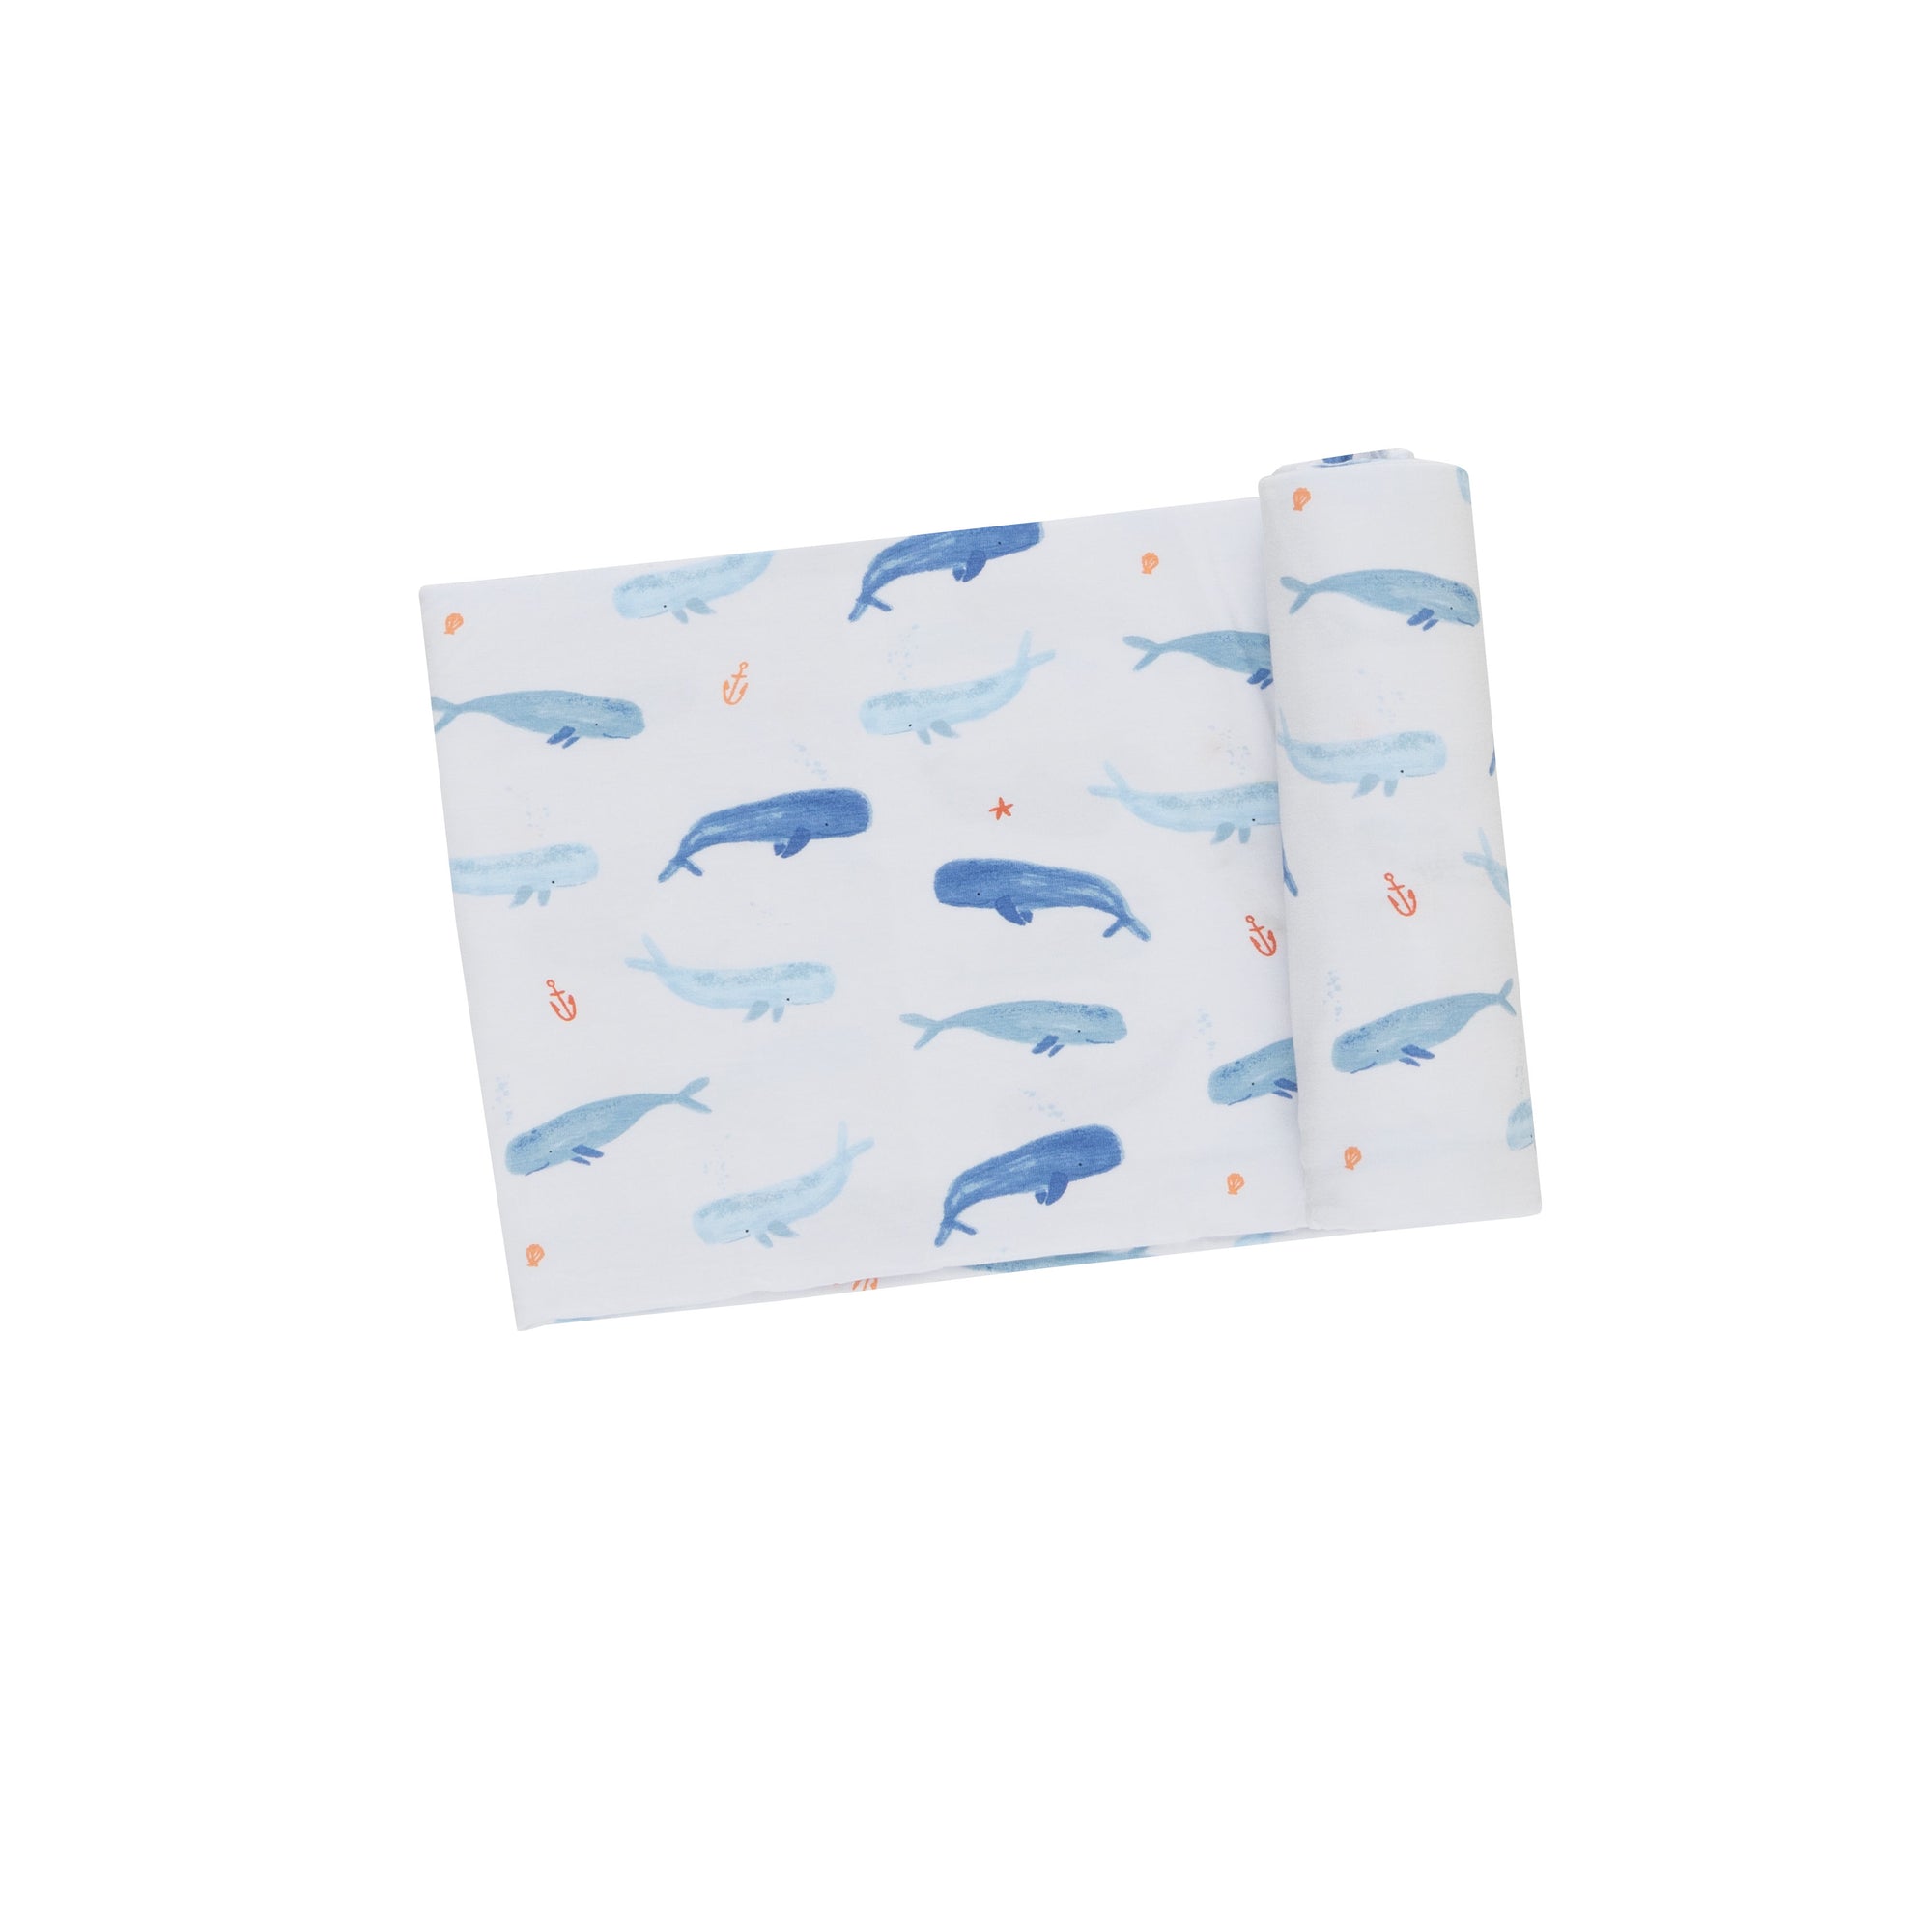 Whale Hello There Bamboo Swaddle Blanket